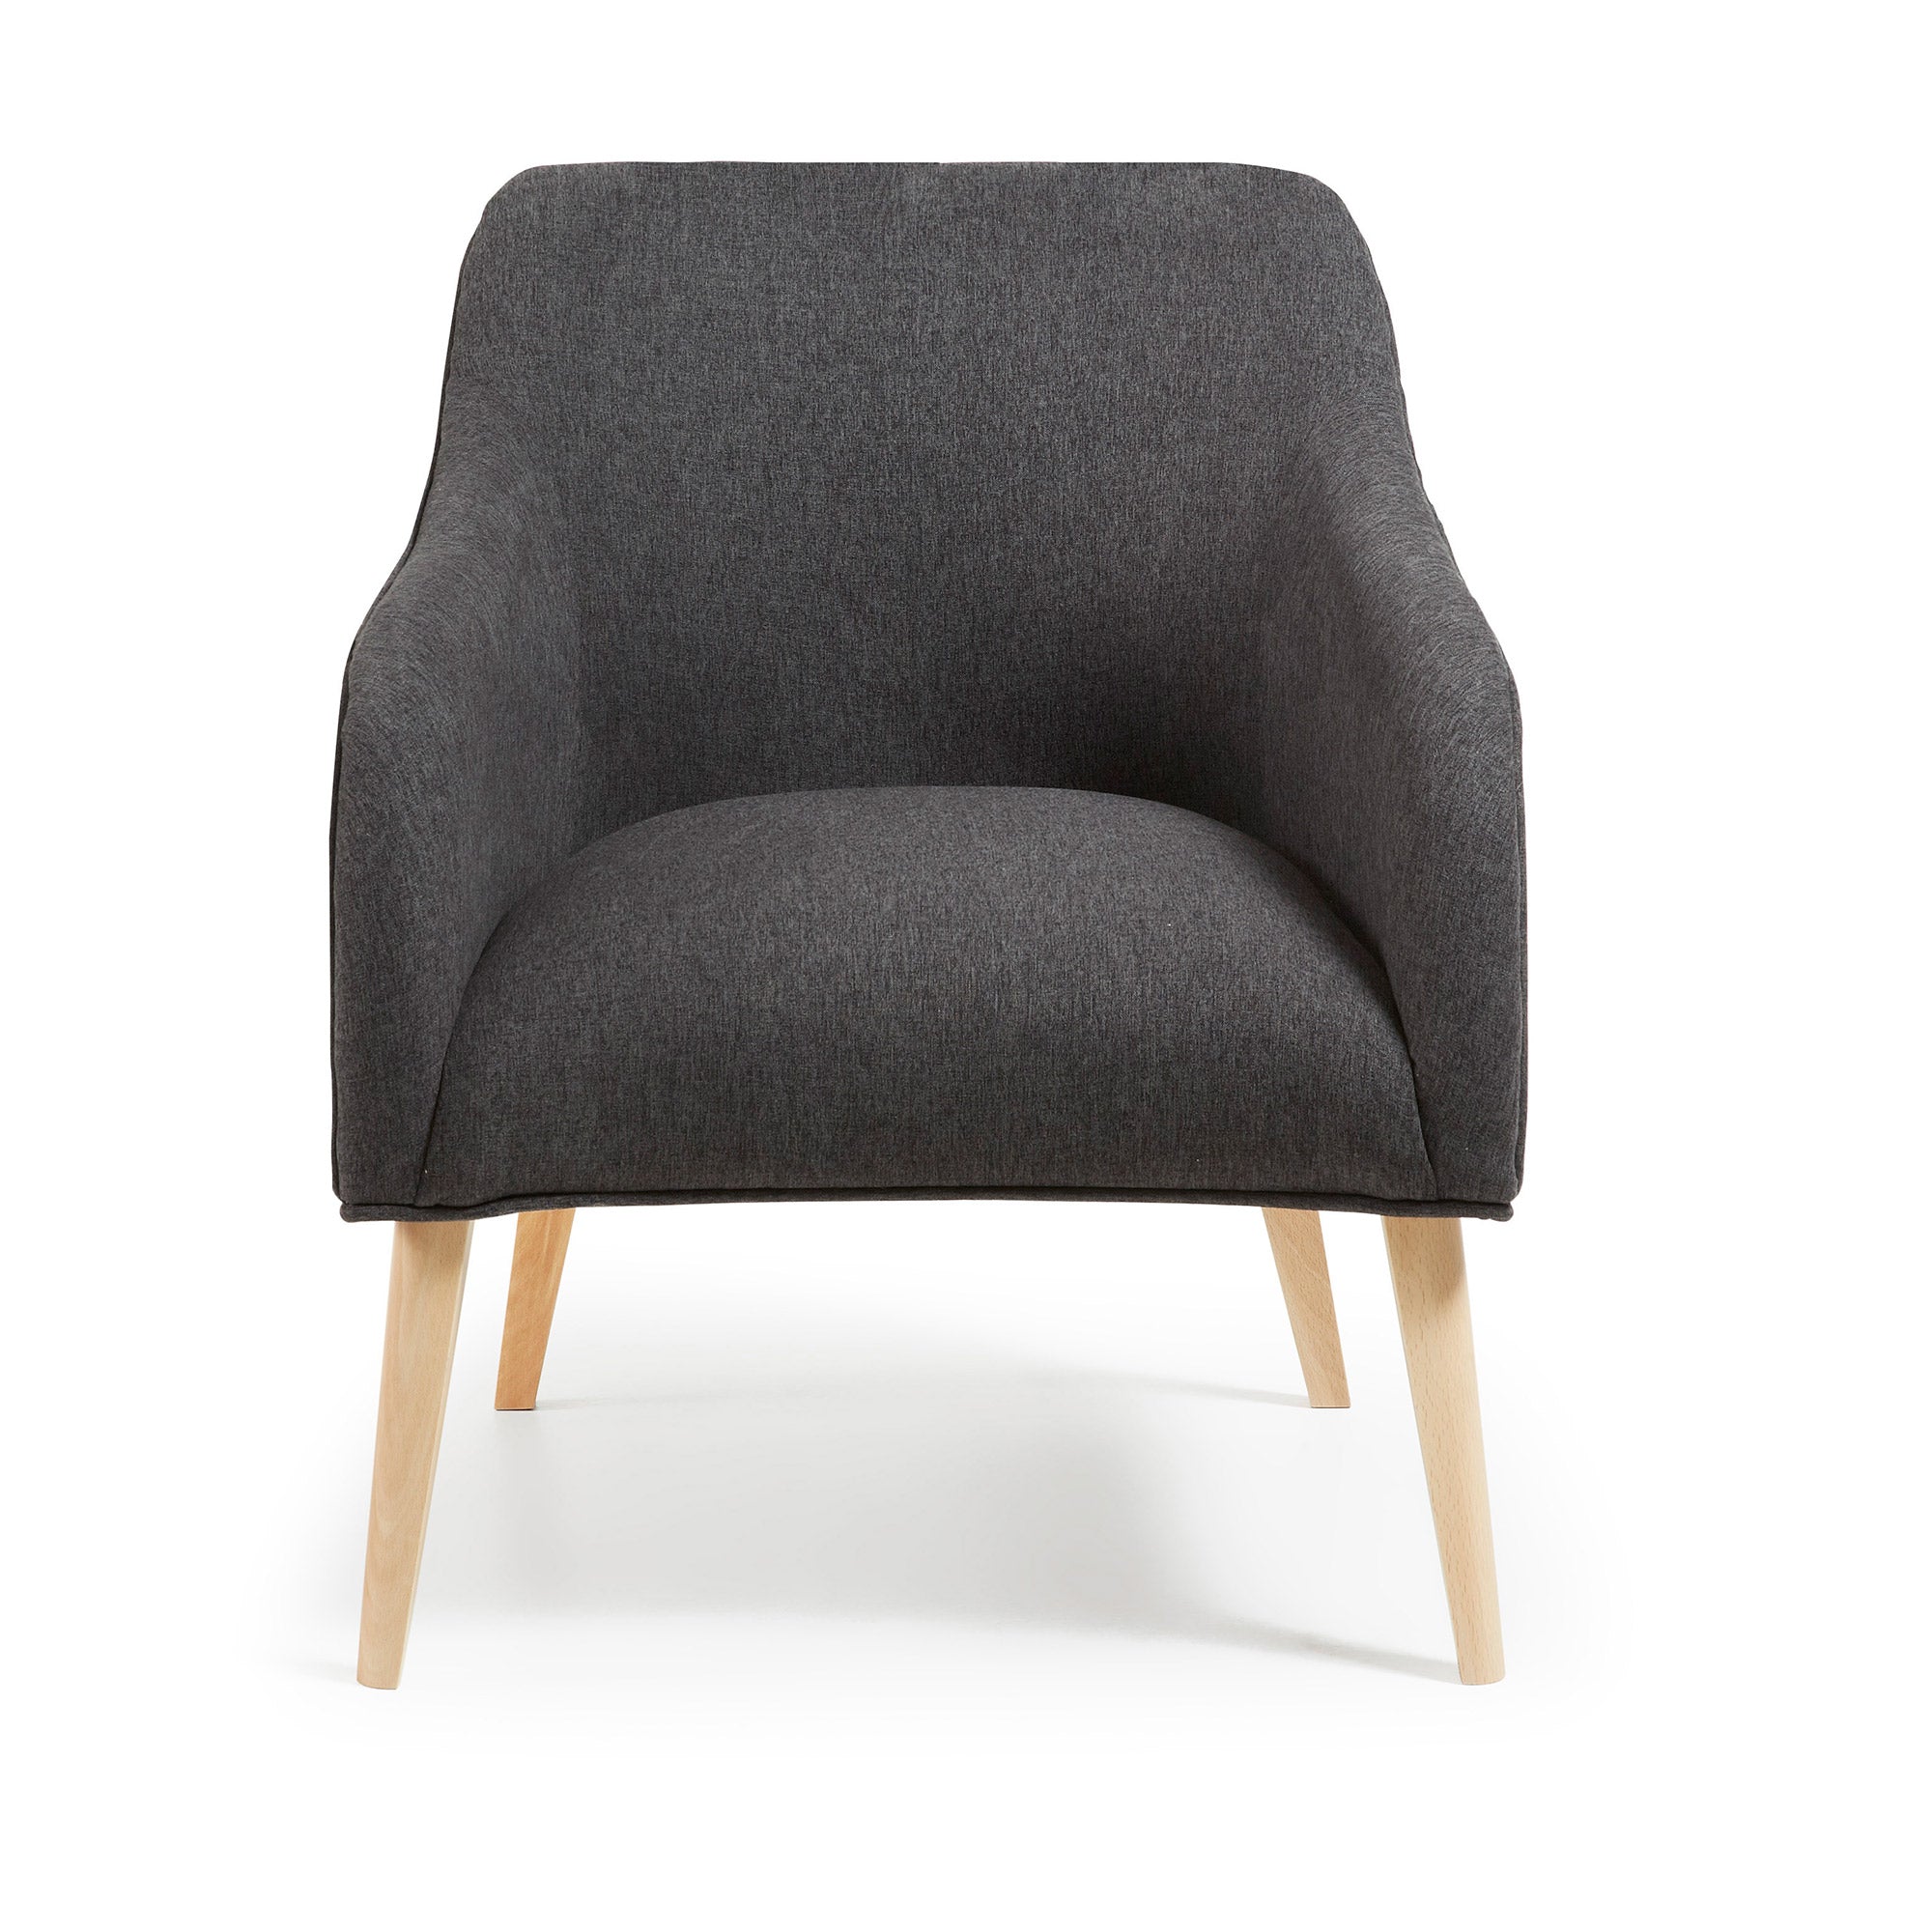 Bobly armchair in black with wood legs in a natural finish